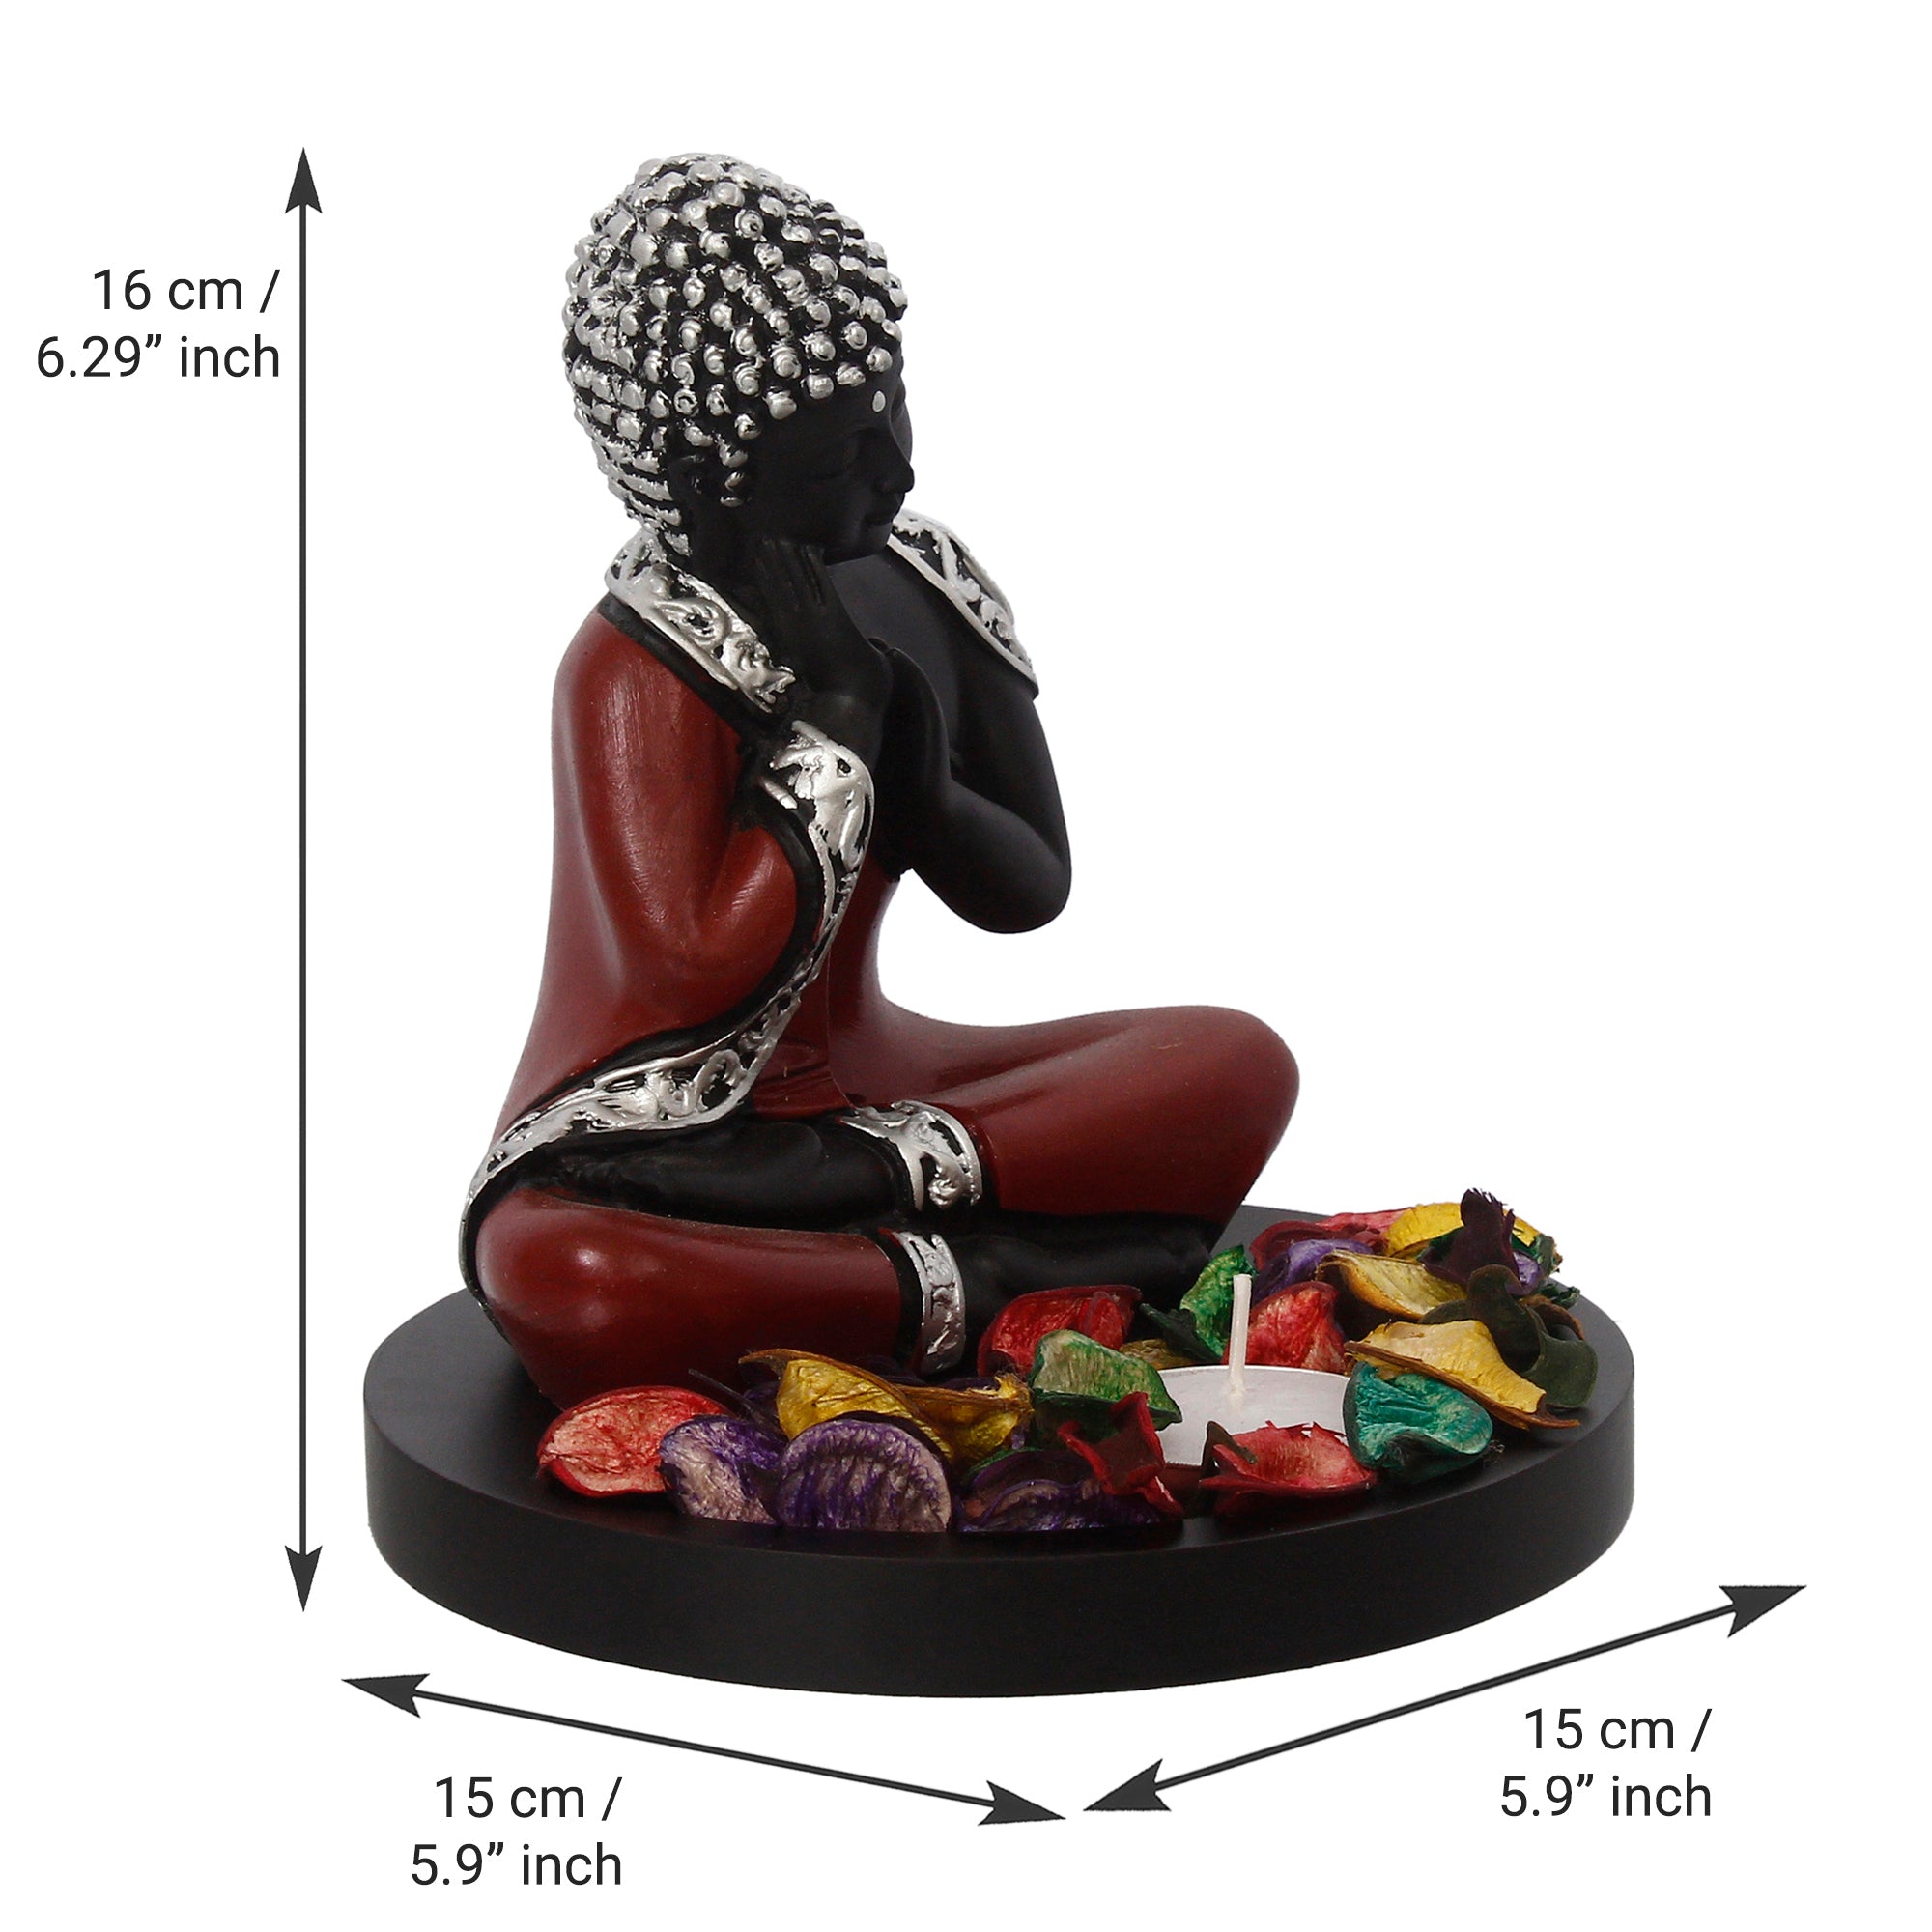 Polyresin Antique Finish Handcrafted Thinking Buddha Statue with Wooden Base, Fragranced Petals and Tealight (Red, Black and Silver) 3